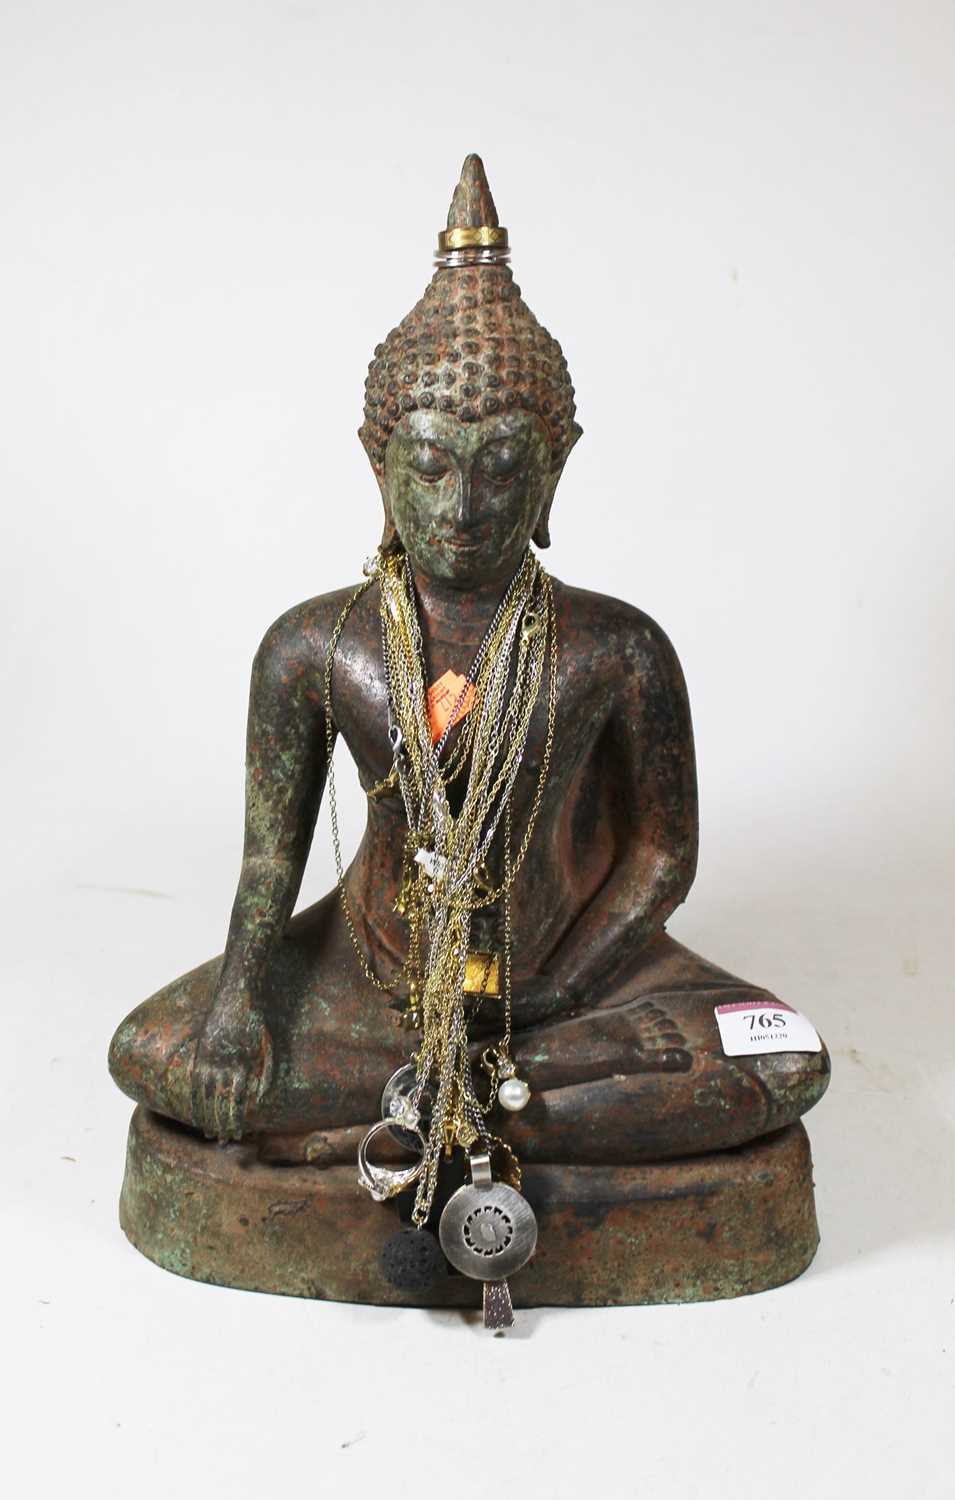 A cast metal model of a deity in typical seated lotus pose with various costume jewellery